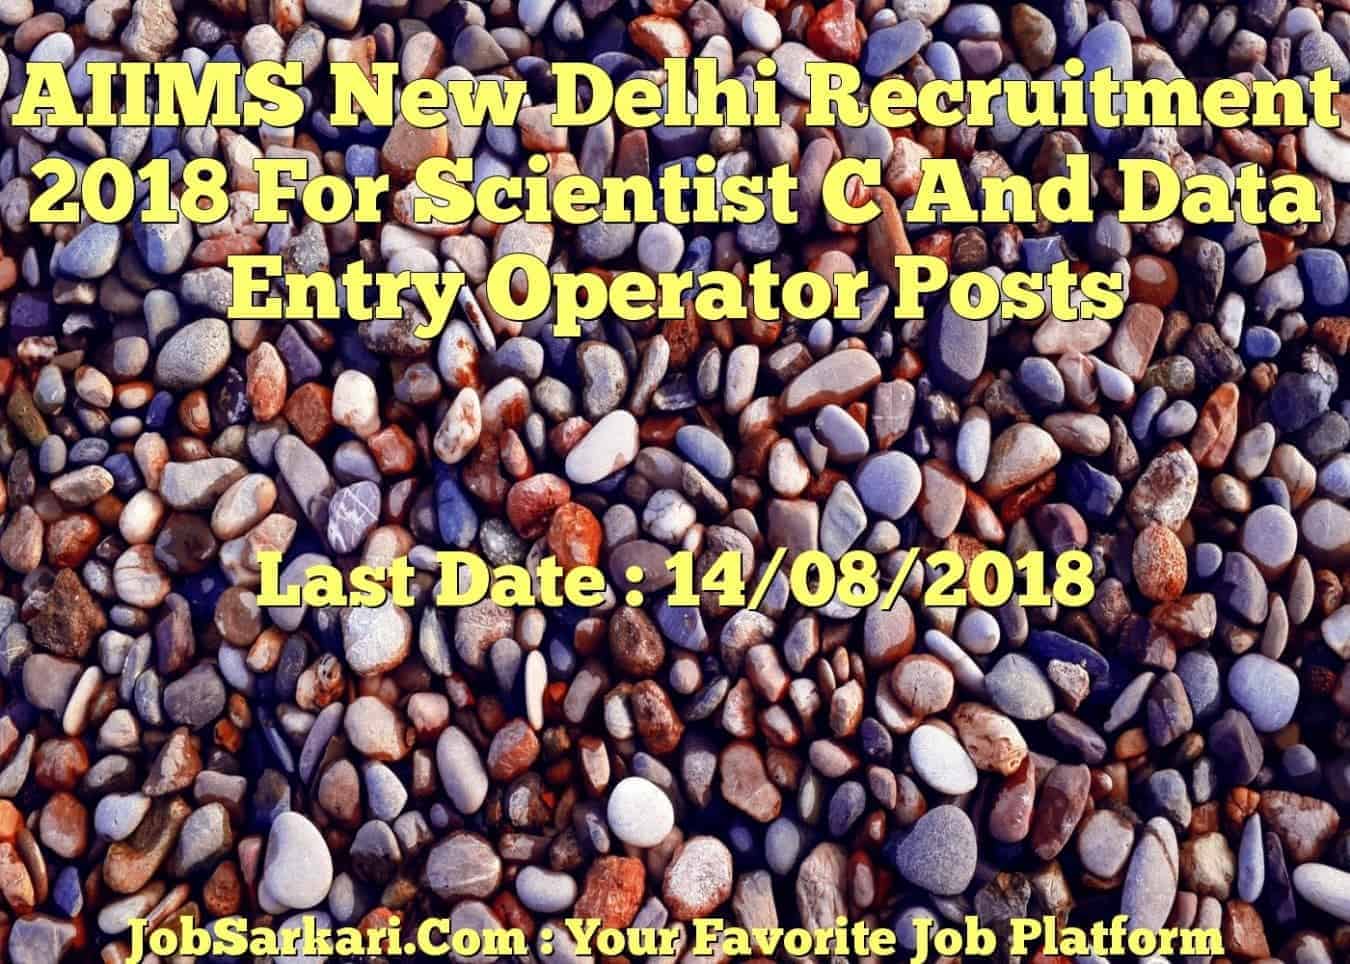 AIIMS New Delhi Recruitment 2018 For Scientist C And Data Entry Operator Posts